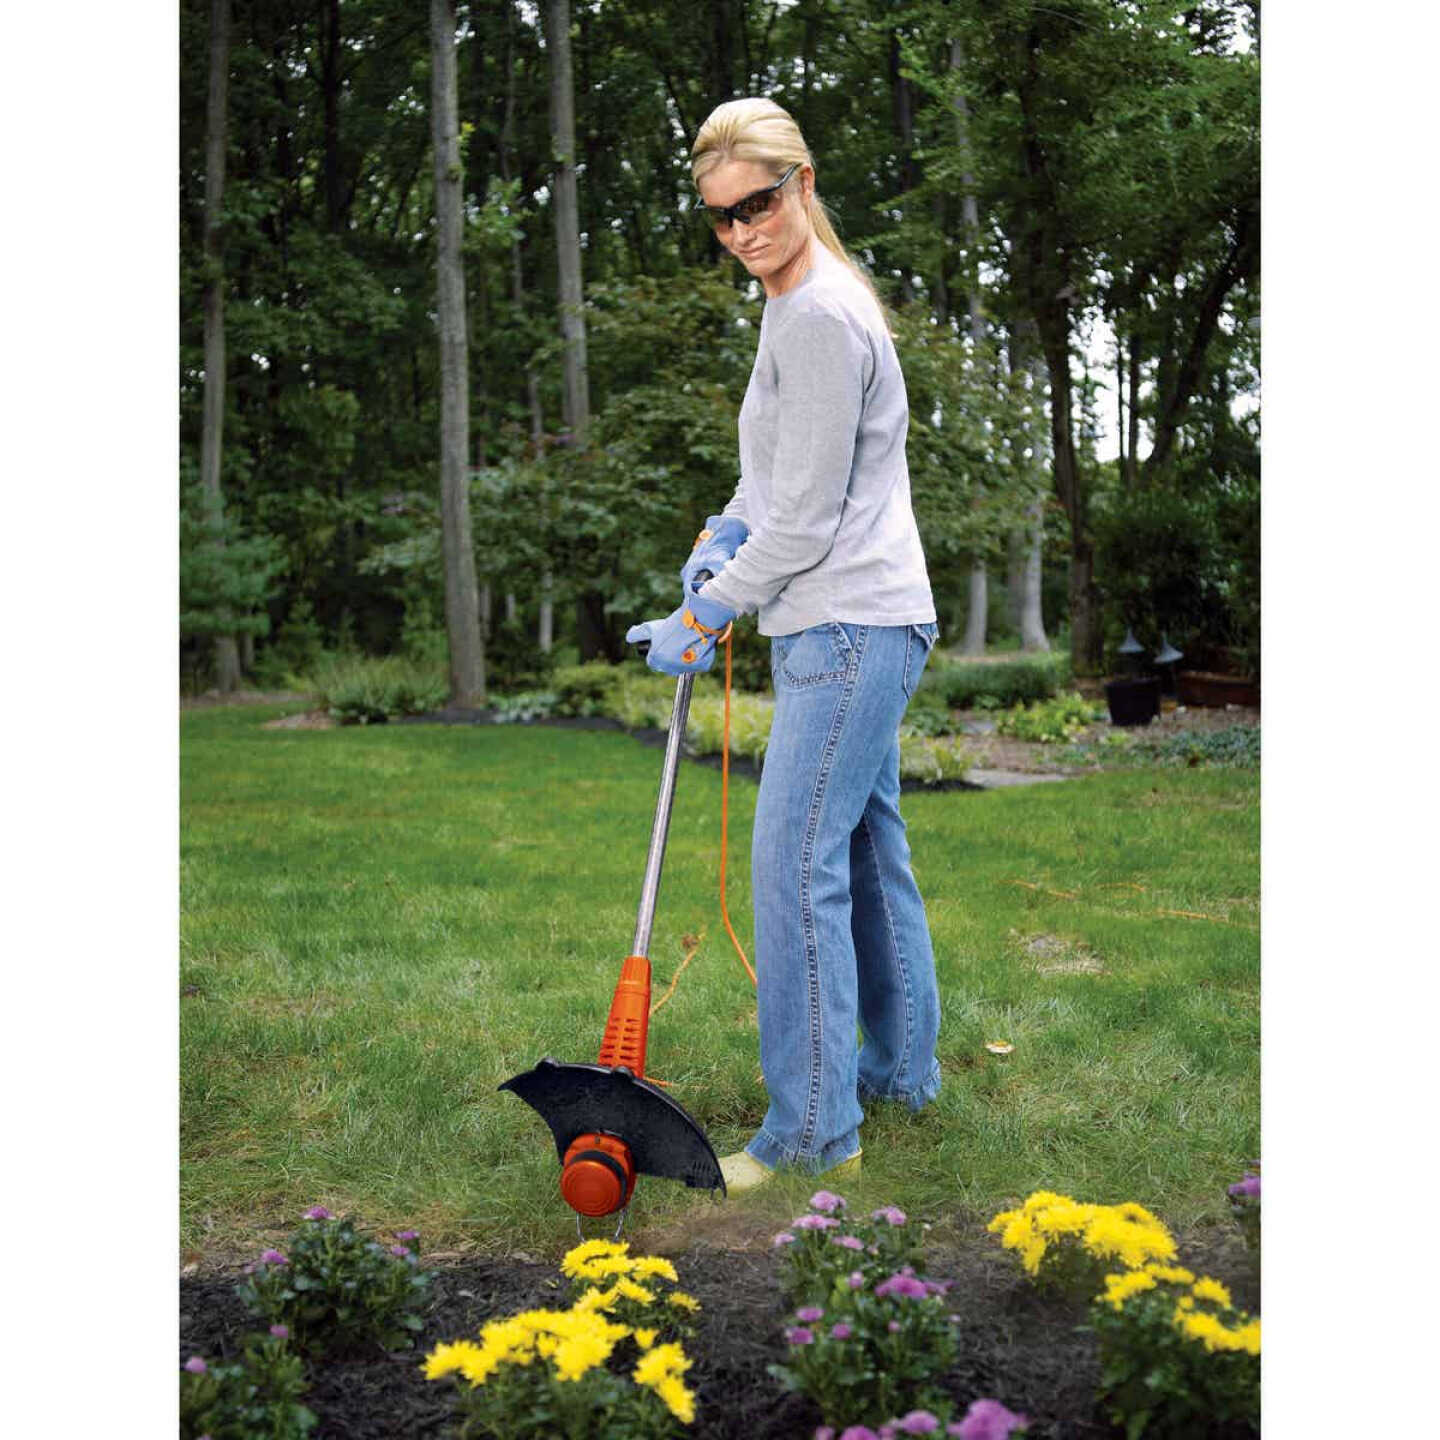 Black & Decker 13 In. 4.4-Amp Straight Shaft Corded Electric String Trimmer Edger Image 6